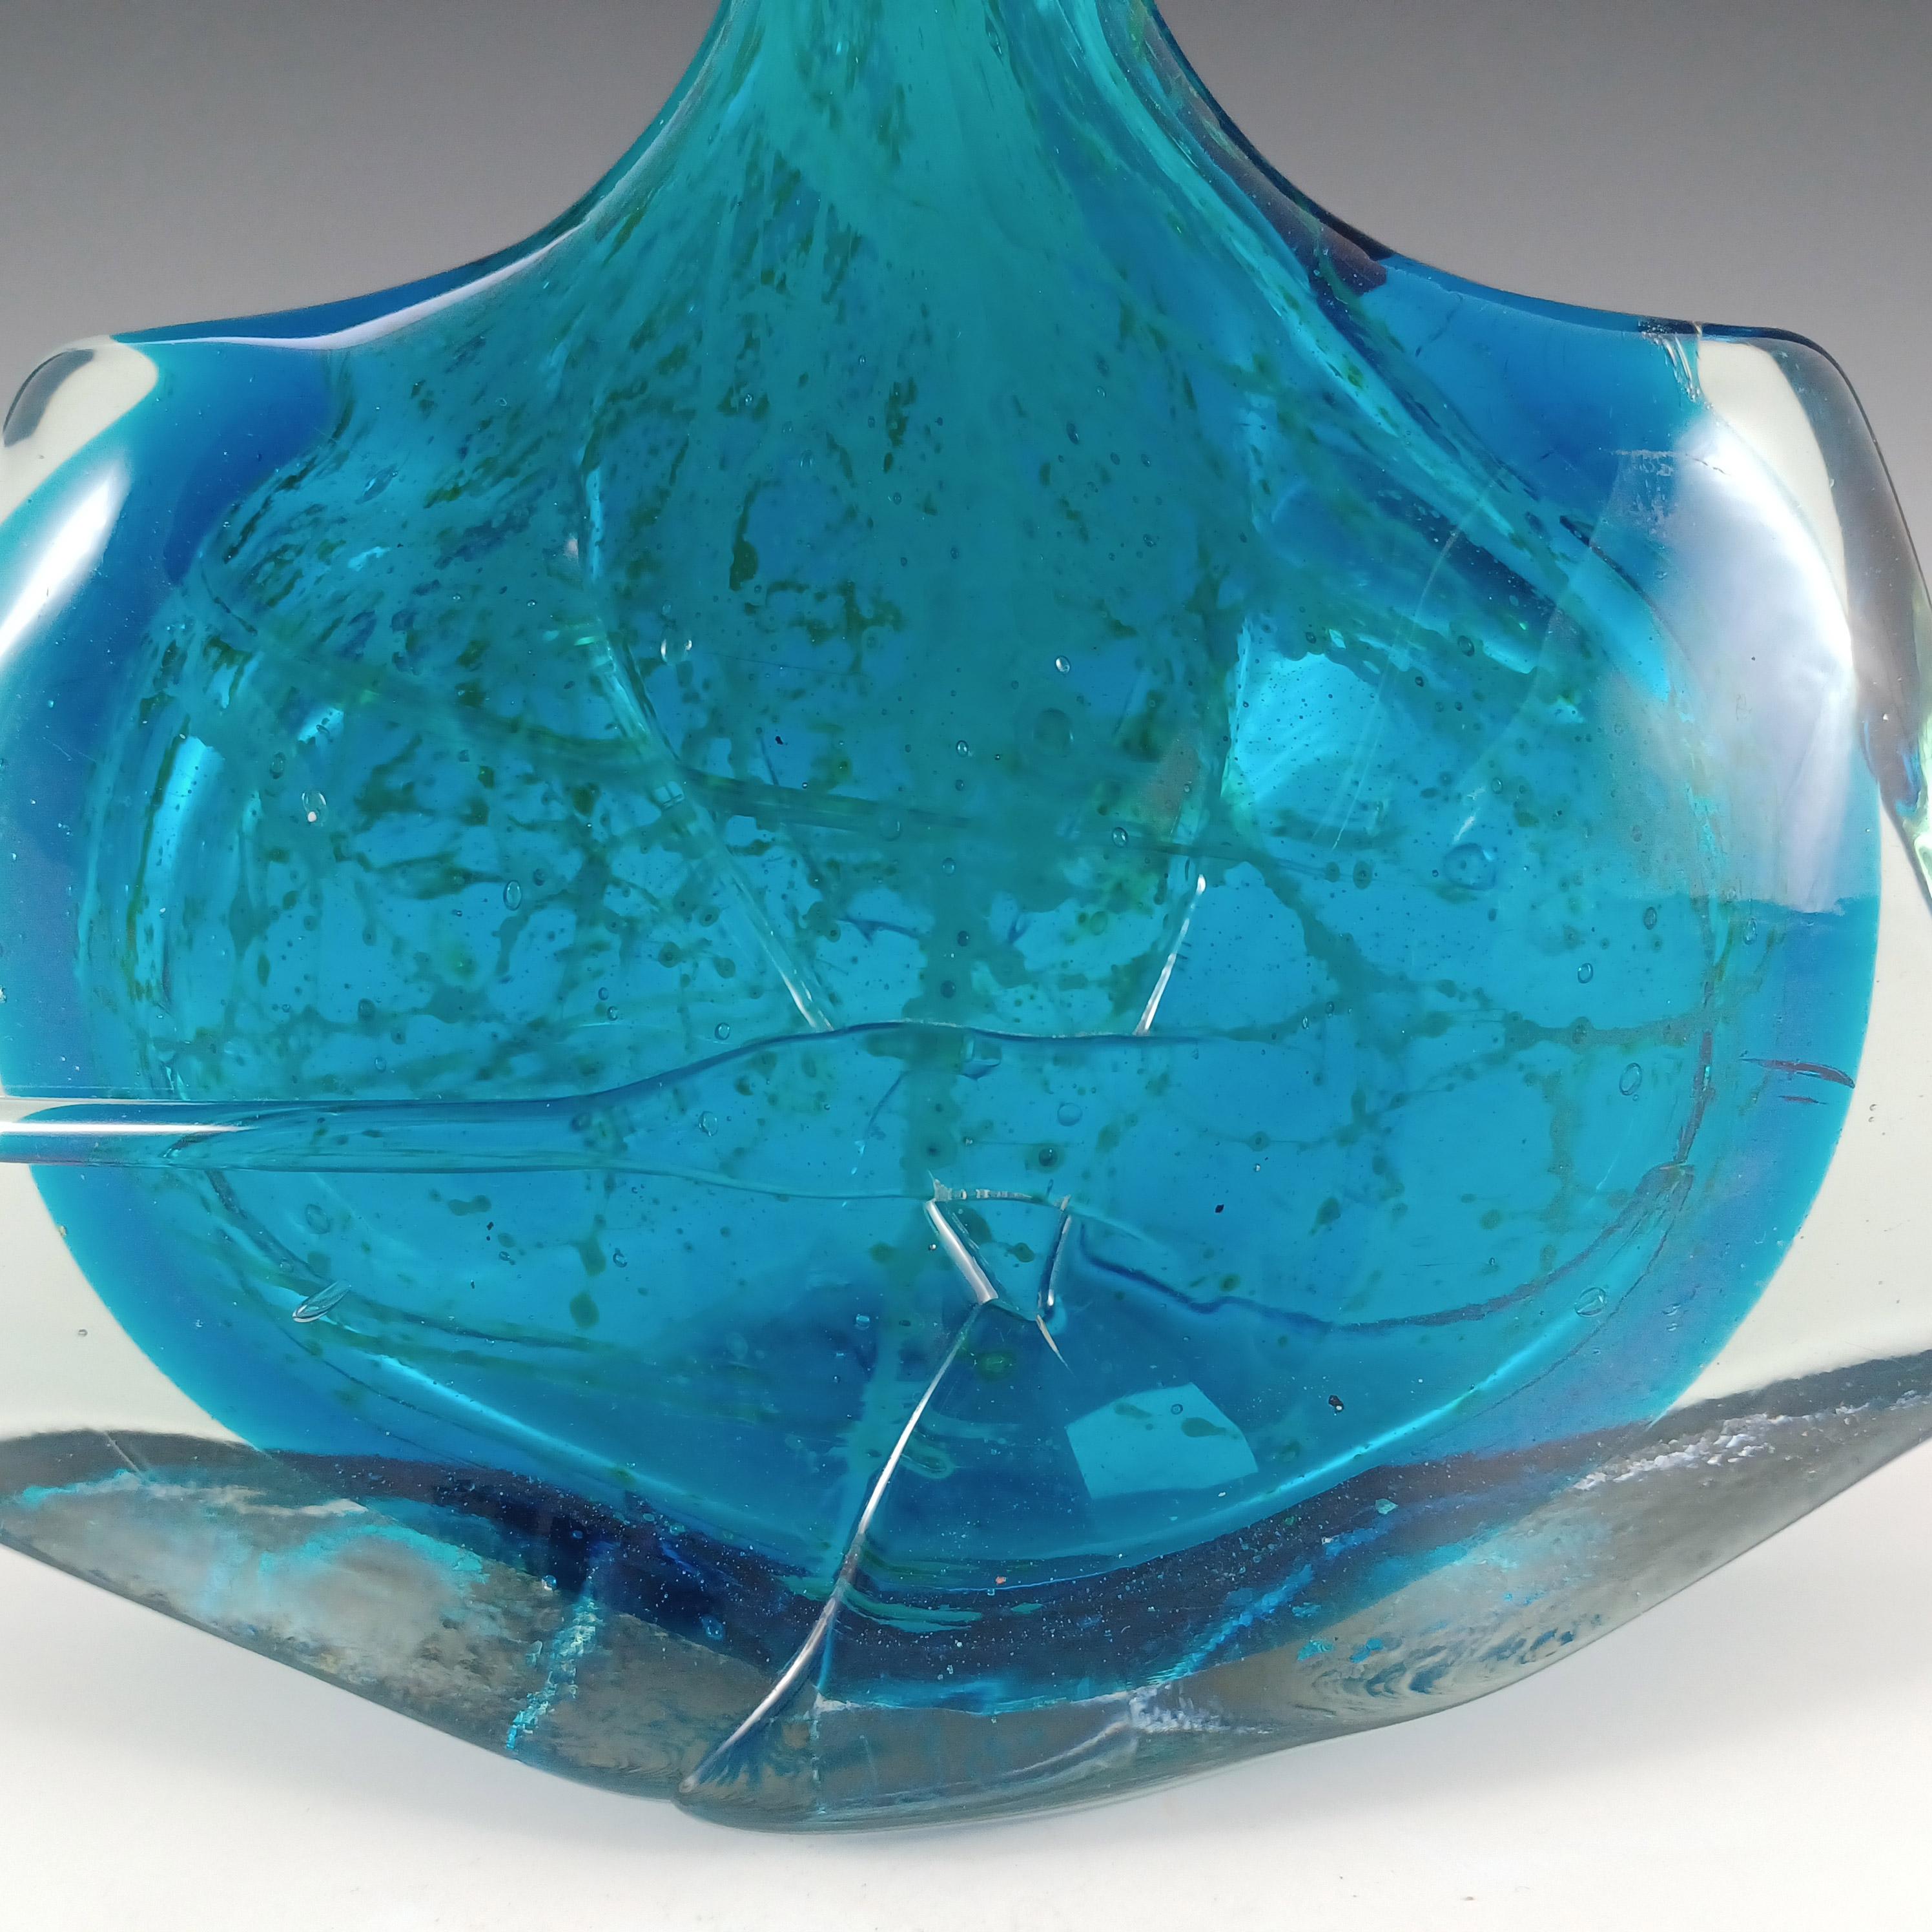 Hand-Crafted Mdina Maltese Blue Glass 'Fish' / 'Axe Head' Vase - Signed 1979 For Sale